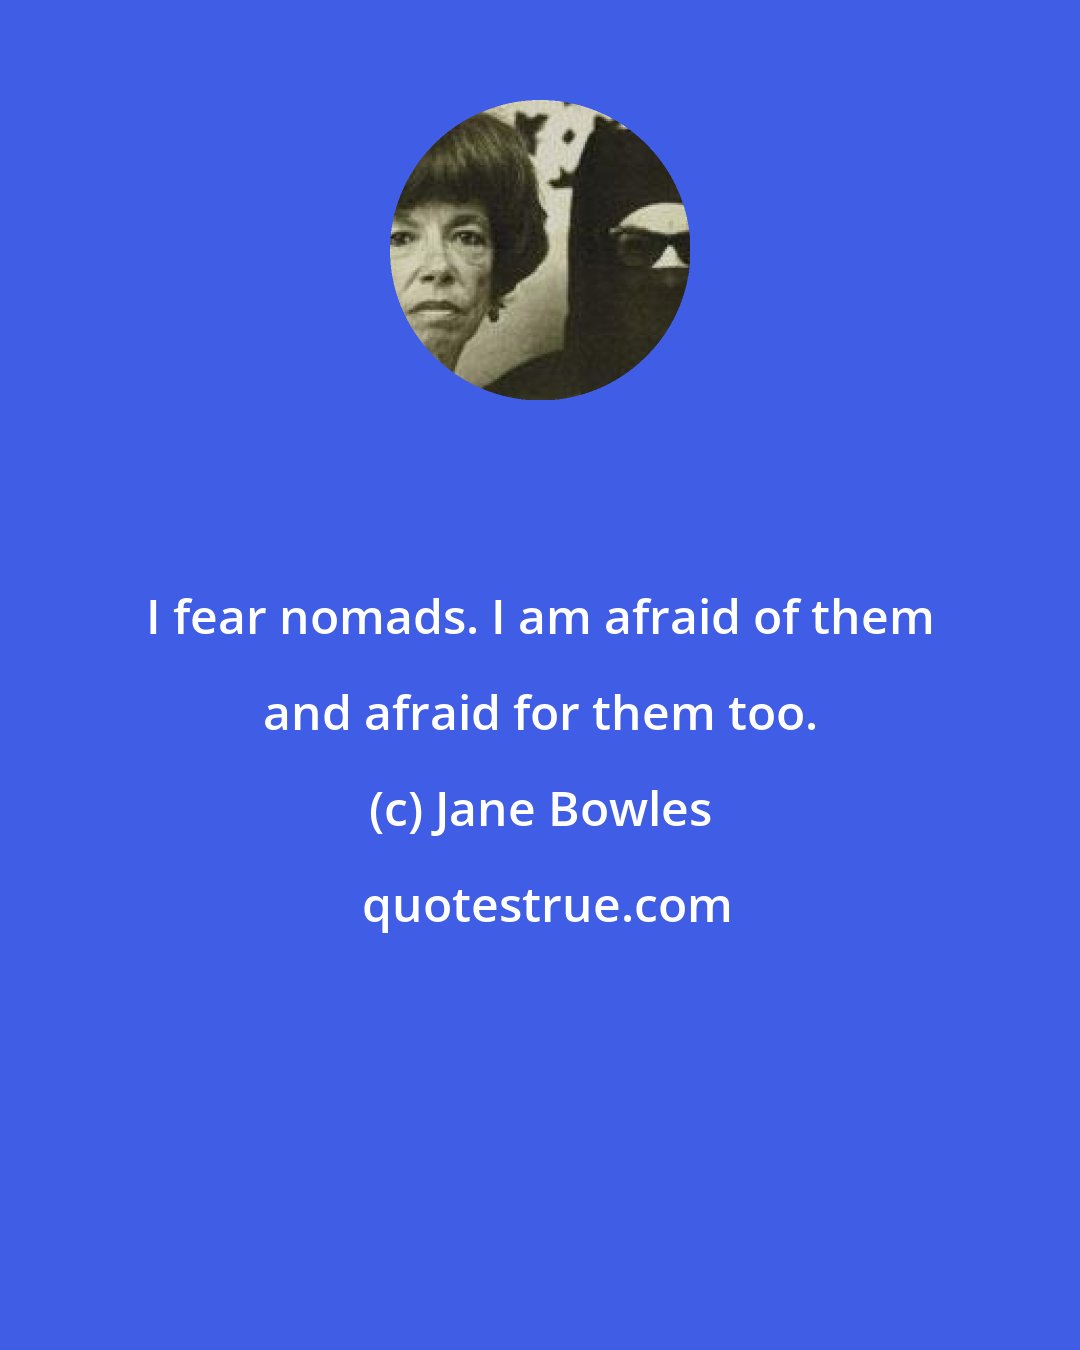 Jane Bowles: I fear nomads. I am afraid of them and afraid for them too.